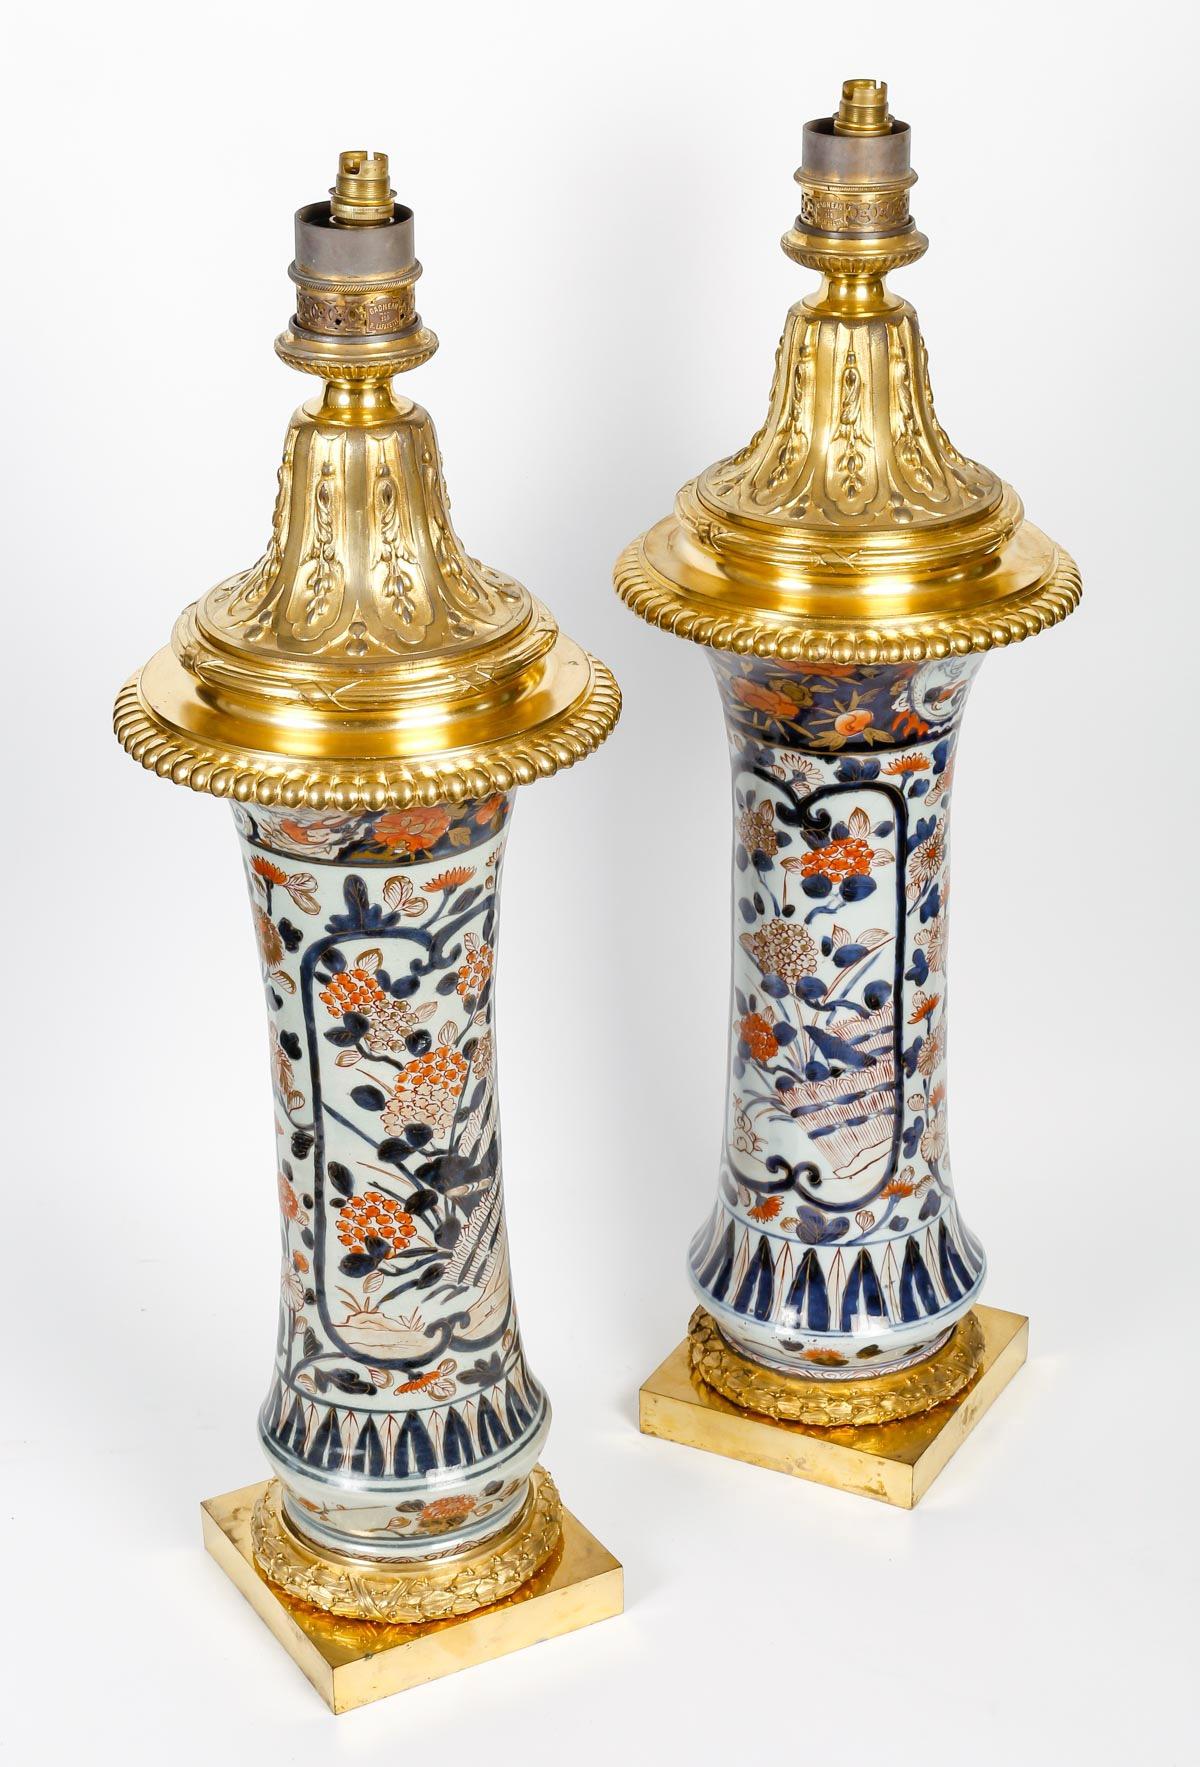 French Pair of Porcelain Vases Ormolu-Mounted in Lamps by Gagneau Paris  XIXth Century For Sale